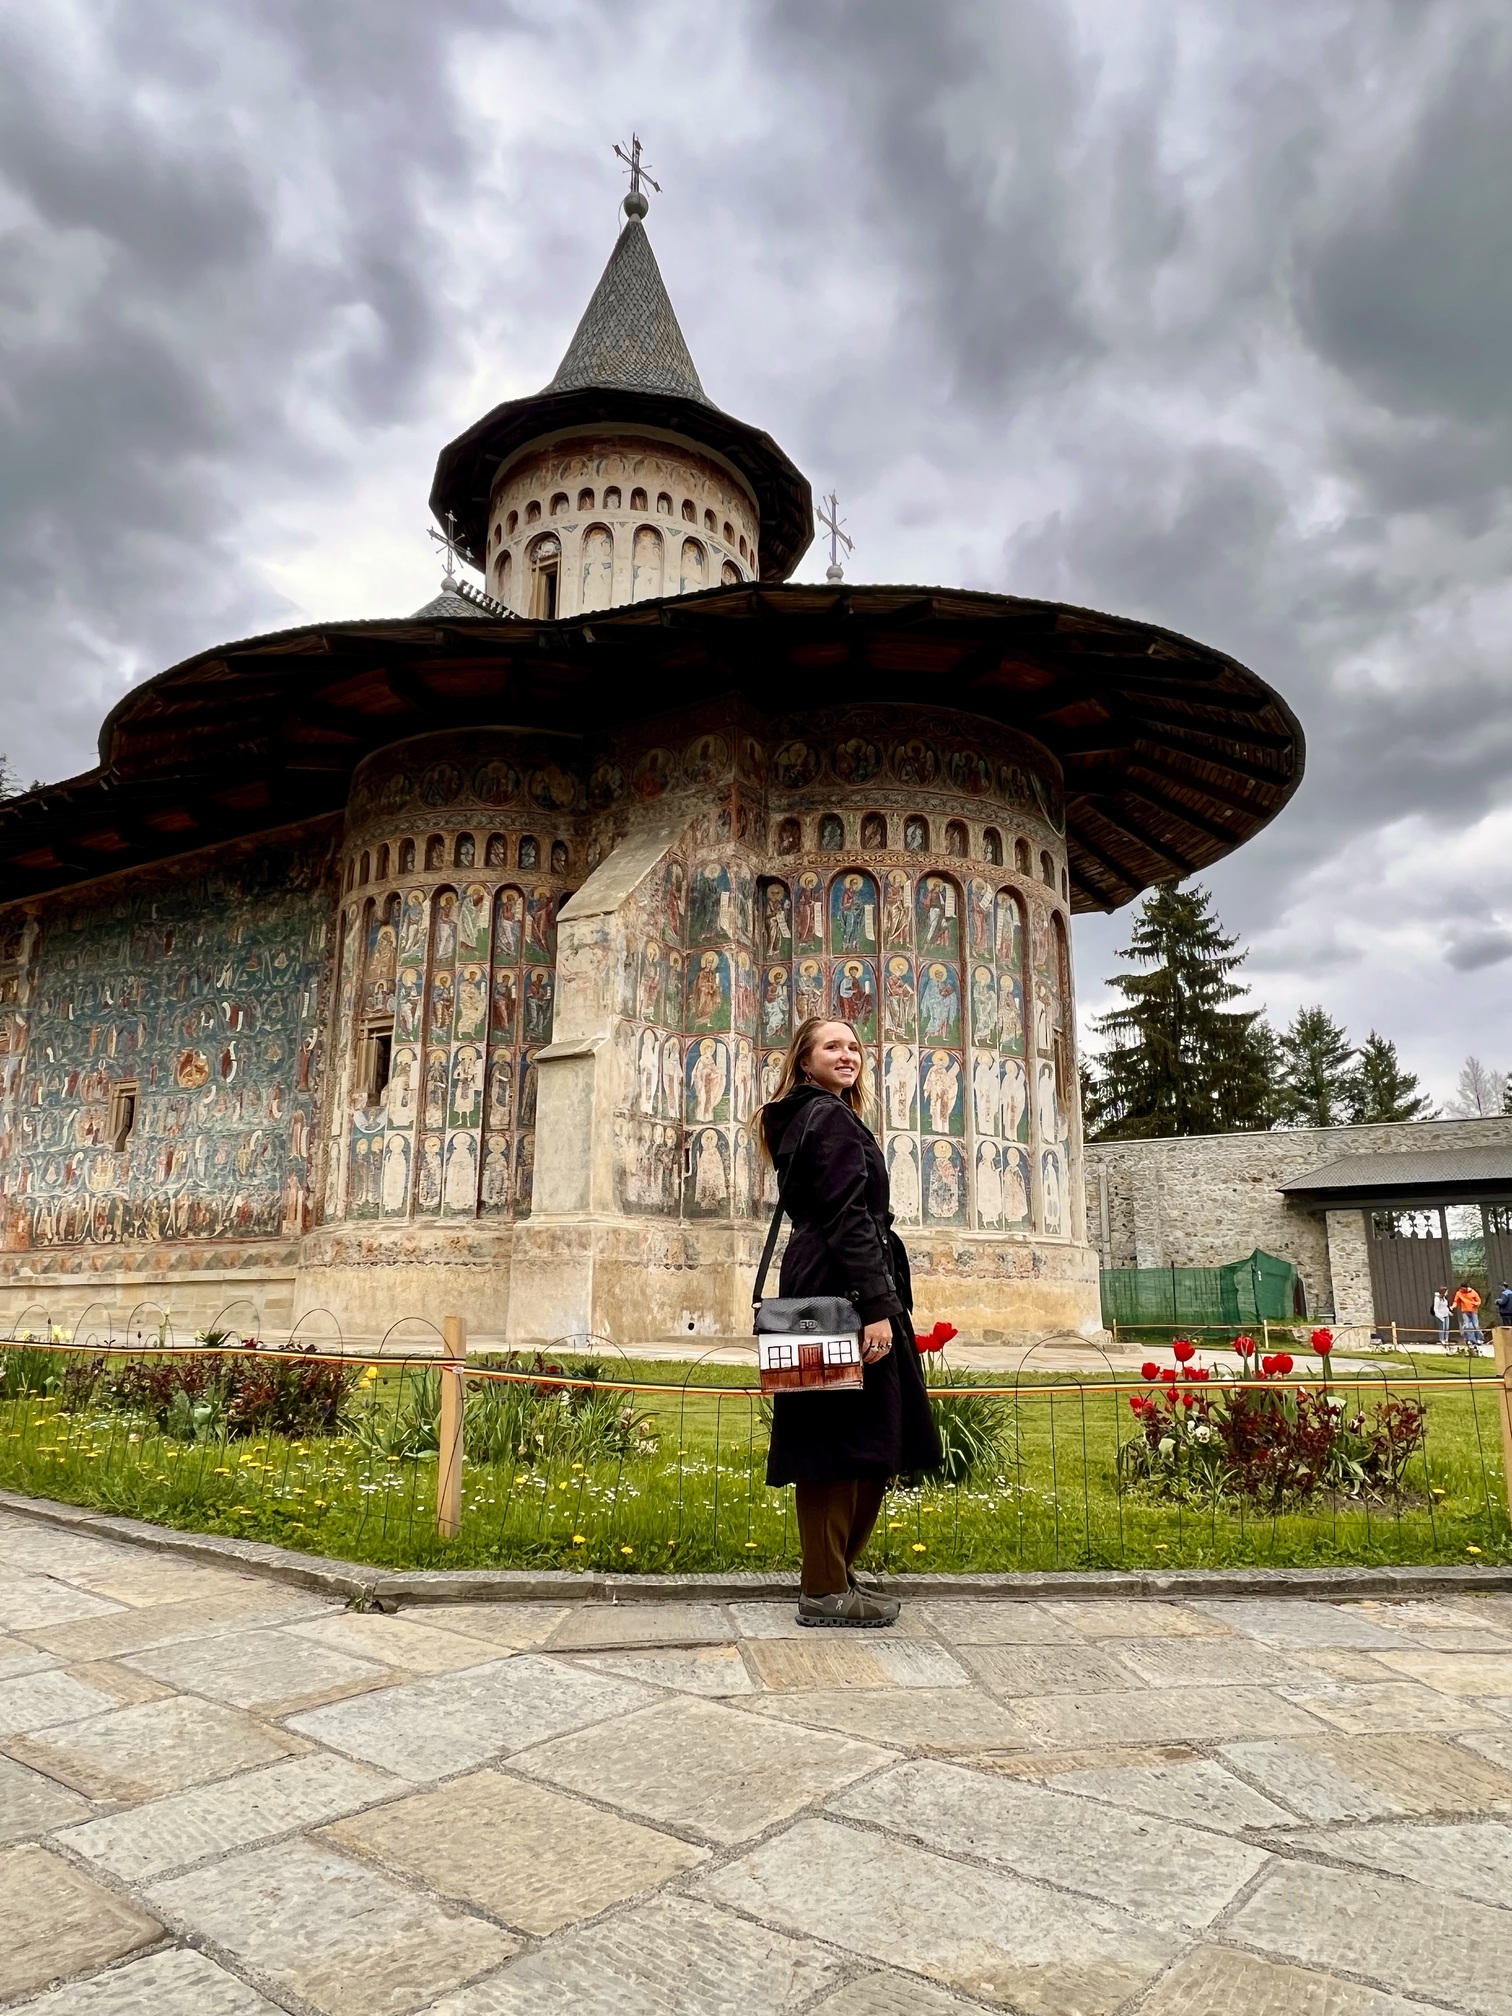 Captivating frescoes at the painted monasteries of Bucovina, showcasing vibrant religious artwork and UNESCO World Heritage site beauty in Romania.